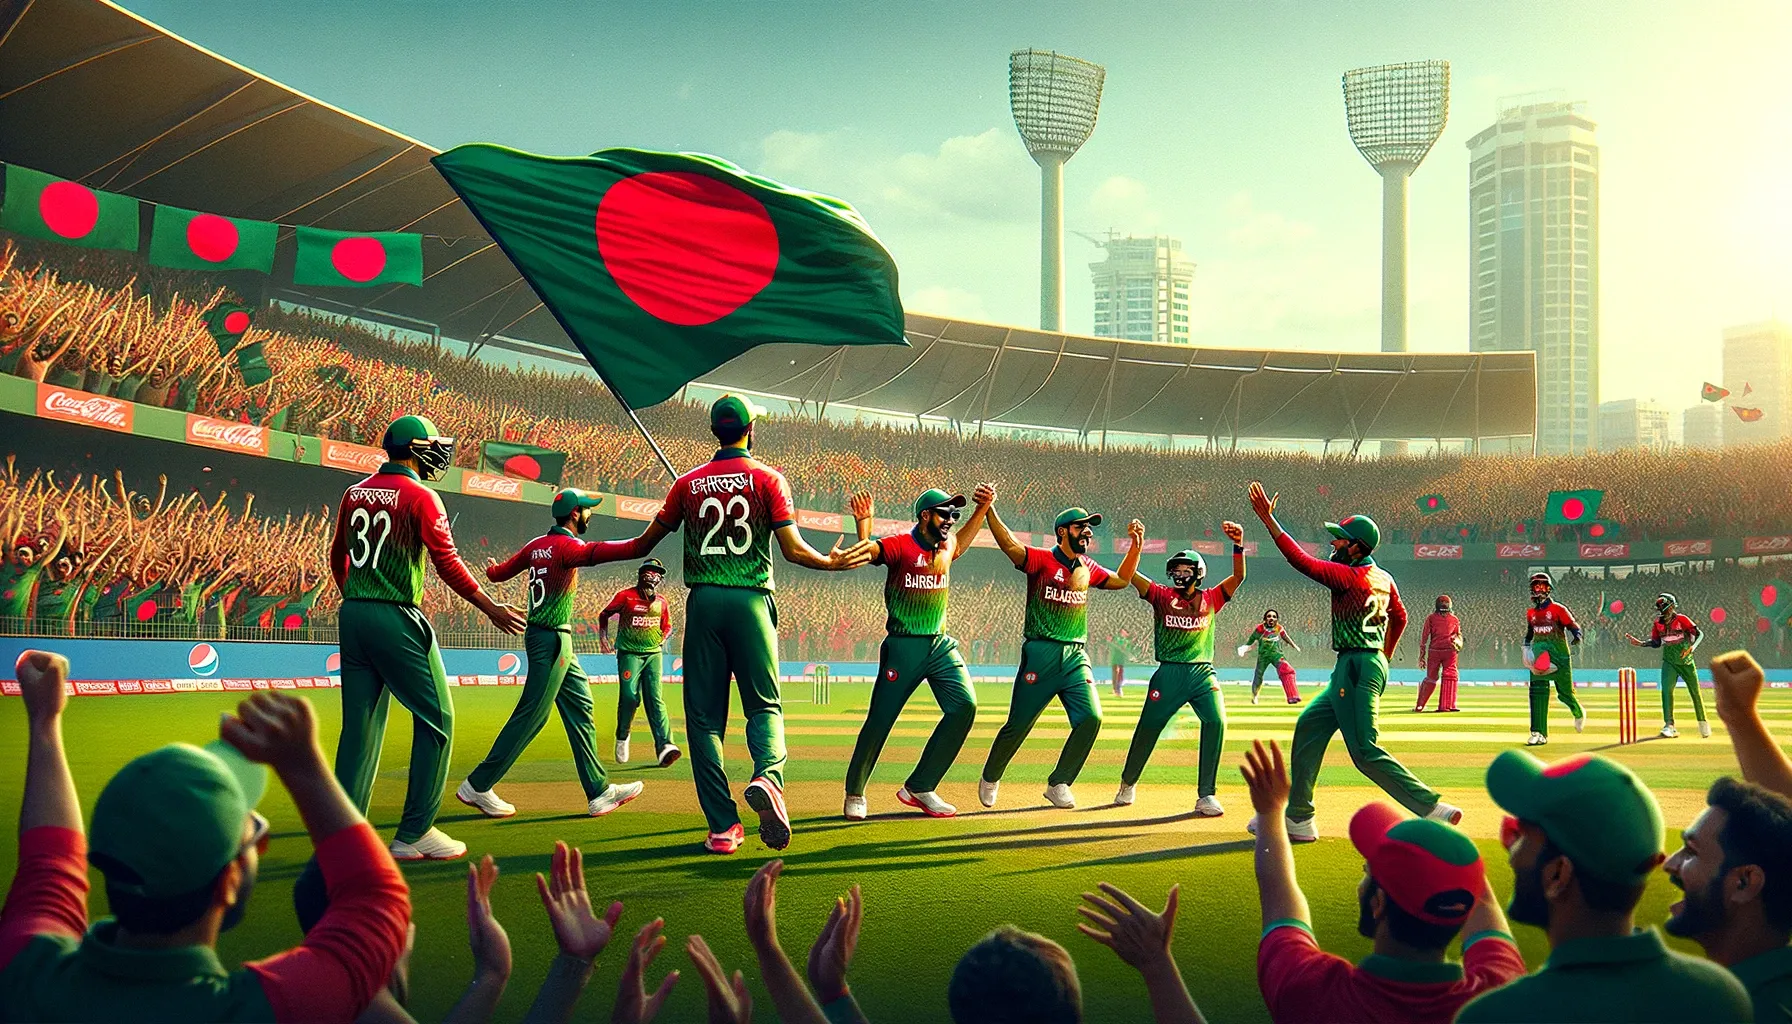 Bangladesh National Cricket Team: The Force of Tigers in Cricket